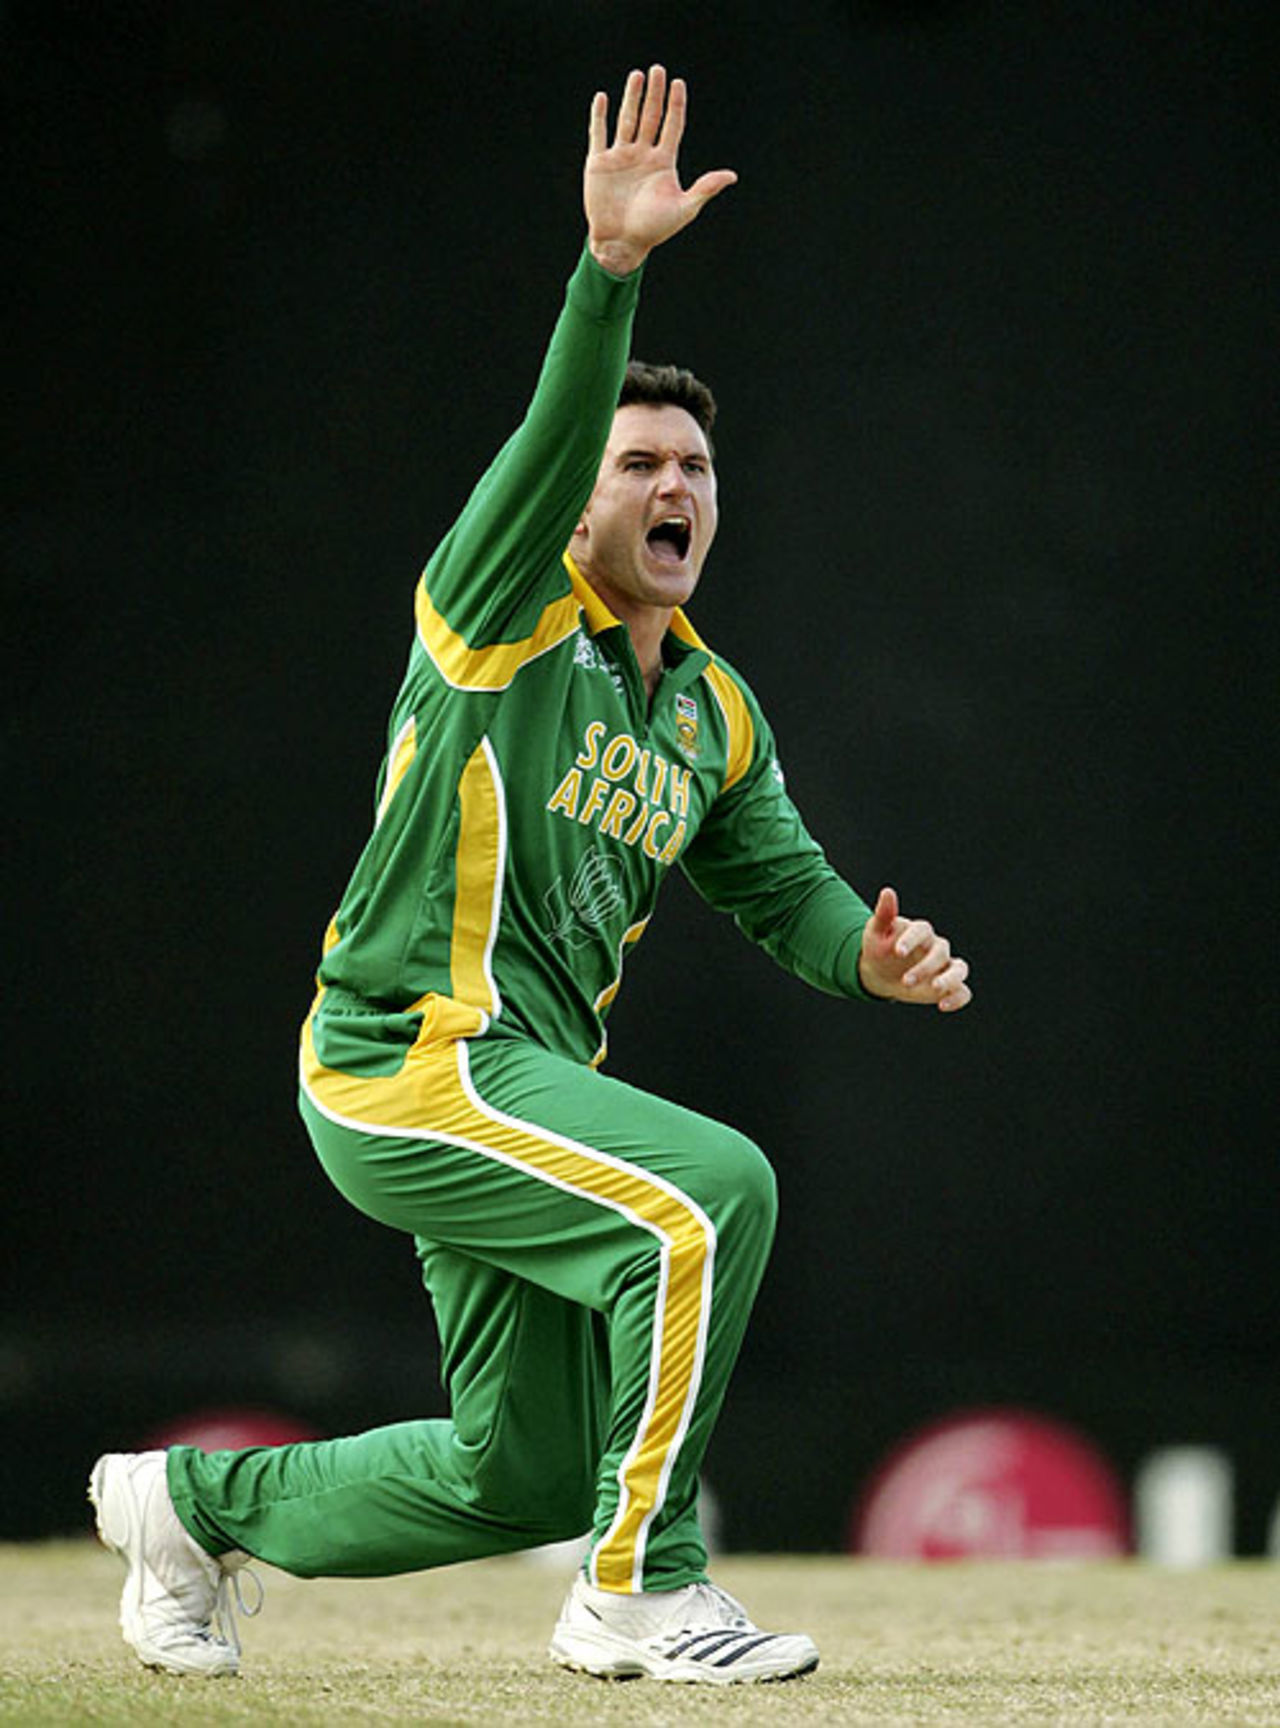 Graeme Smith successfully appeals for the wicket of Eric Szwarczynski, Netherlands v South Africa, Group A, St Kitts, March 16, 2007